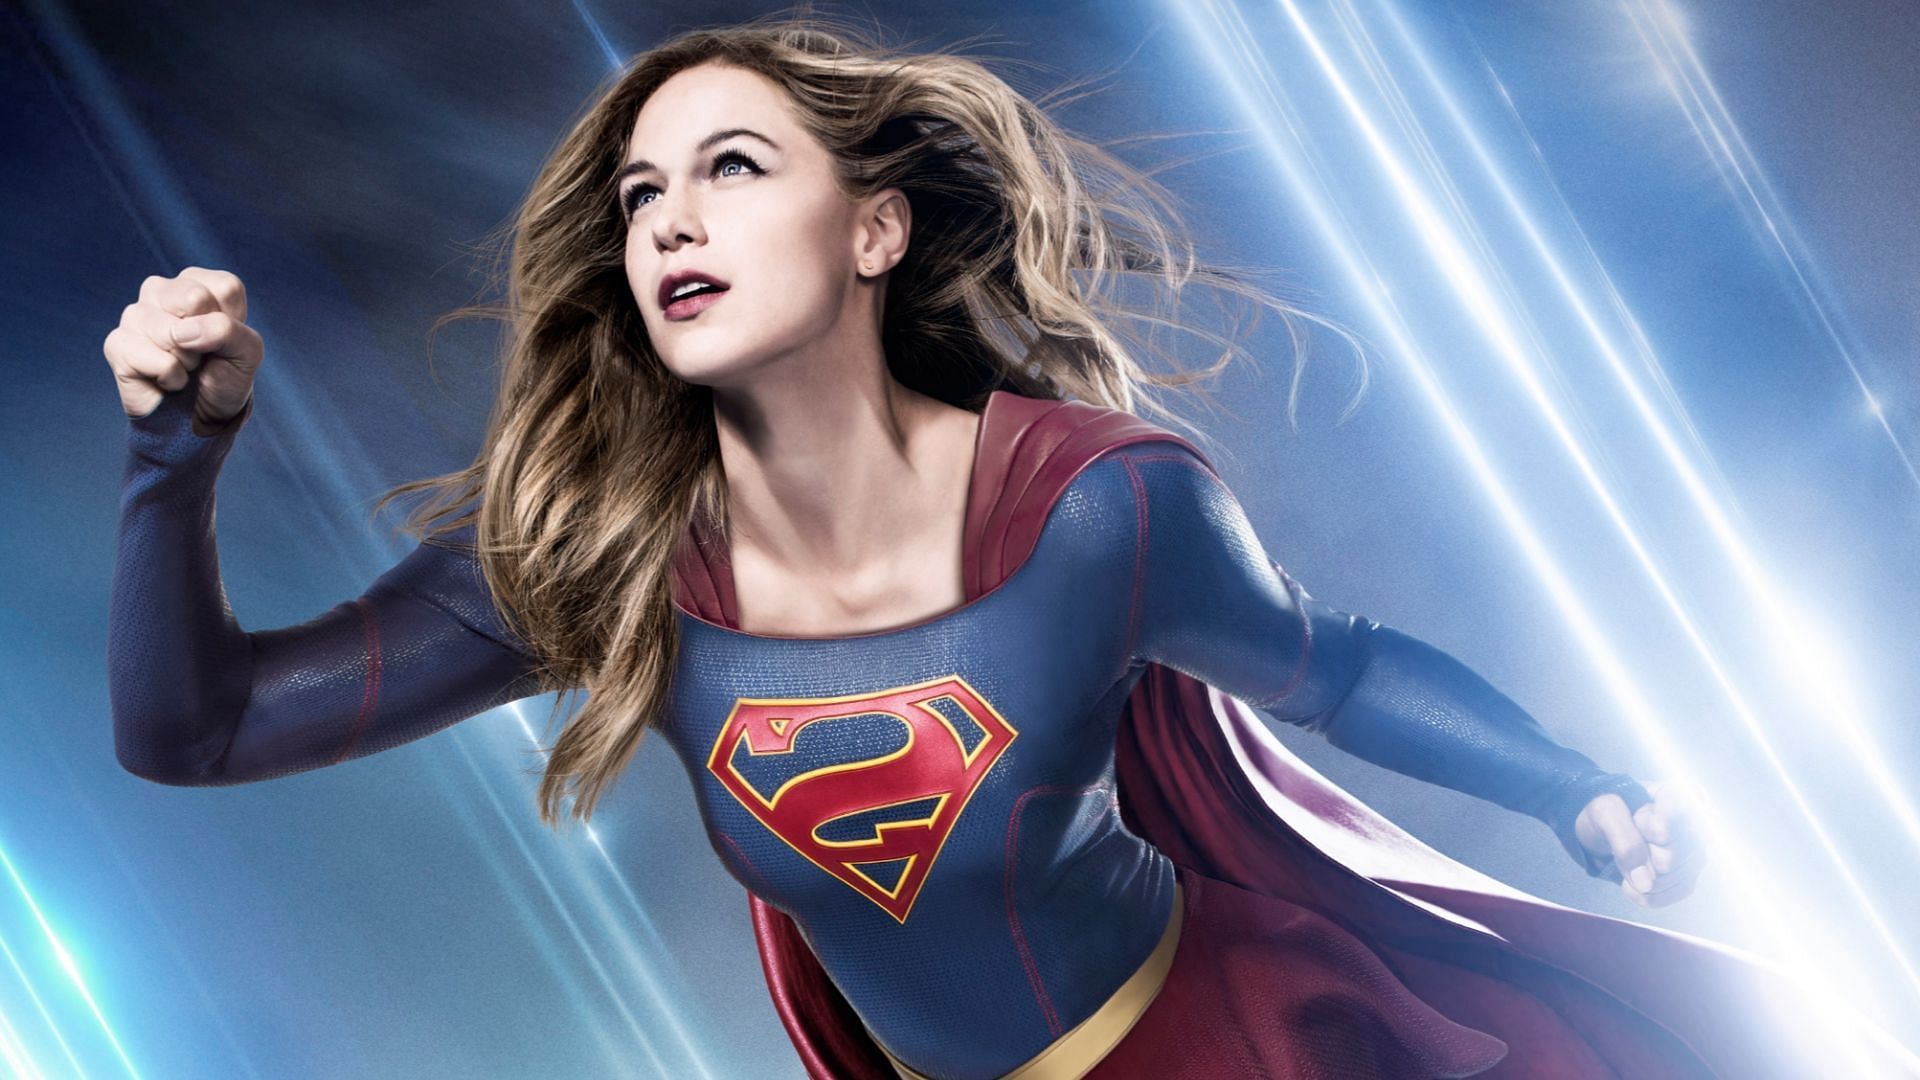 Supergirl is a formidable member of the Justice League and a powerful protector. (Image via DC)